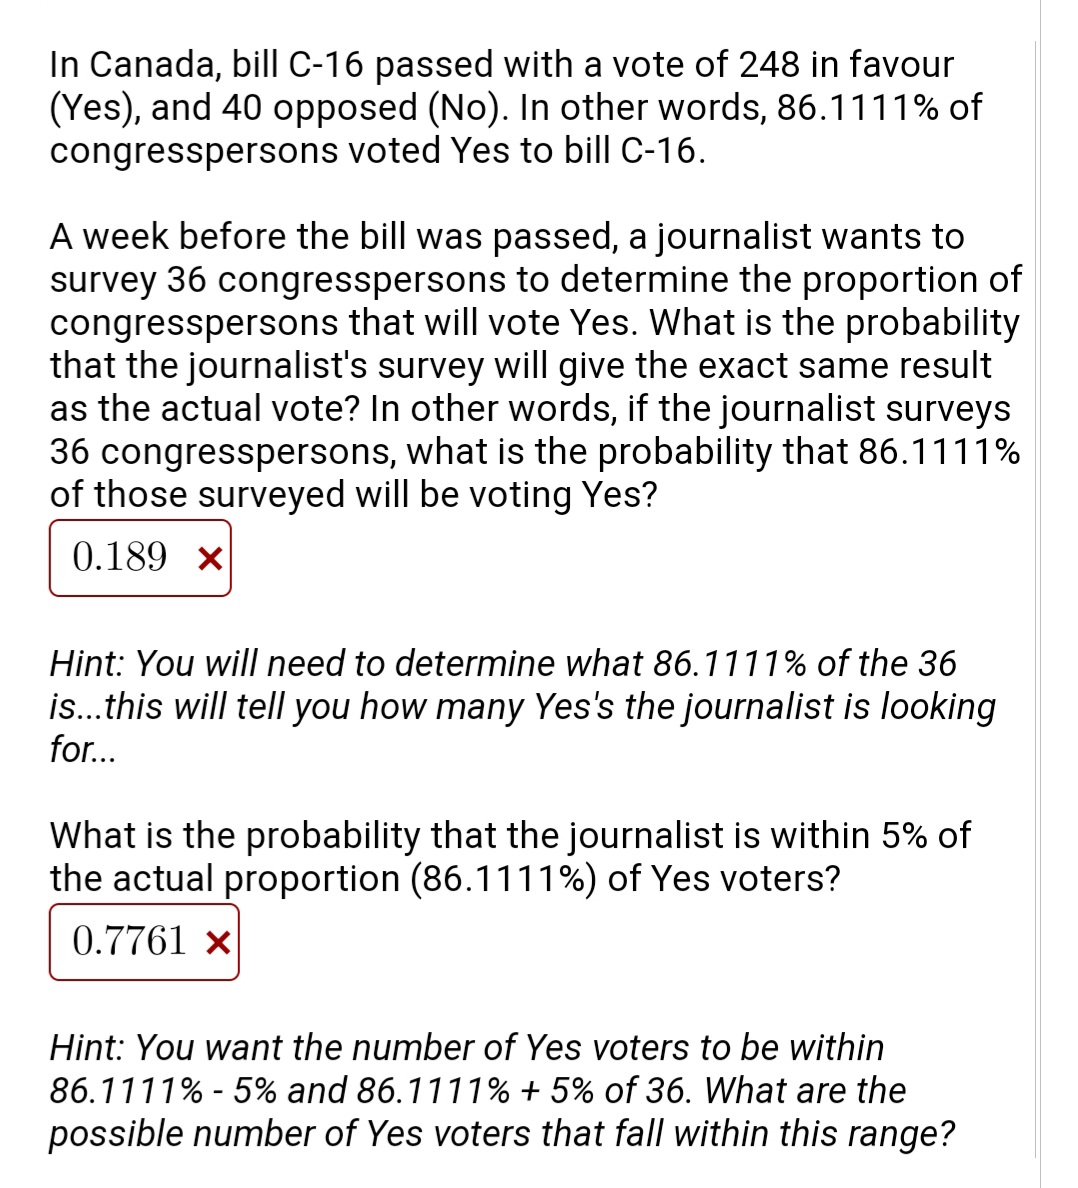 In Canada, bill C-16 passed with a vote of 248 in favour
(Yes), and 40 opposed (No). In other words, 86.1111% of
congresspersons voted Yes to bill C-16.
A week before the bill was passed, a journalist wants to
survey 36 congresspersons to determine the proportion of
congresspersons that will vote Yes. What is the probability
that the journalist's survey will give the exact same result
as the actual vote? In other words, if the journalist surveys
36 congresspersons, what is the probability that 86.1111%
of those surveyed will be voting Yes?
0.189 x
Hint: You will need to determine what 86.1111% of the 36
is..this will tell you how many Yes's the journalist is looking
for...
What is the probability that the journalist is within 5% of
the actual proportion (86.1111%) of Yes voters?
0.7761 ×
Hint: You want the number of Yes voters to be within
86.1111% - 5% and 86.1111% + 5% of 36. What are the
possible number of Yes voters that fall within this range?
